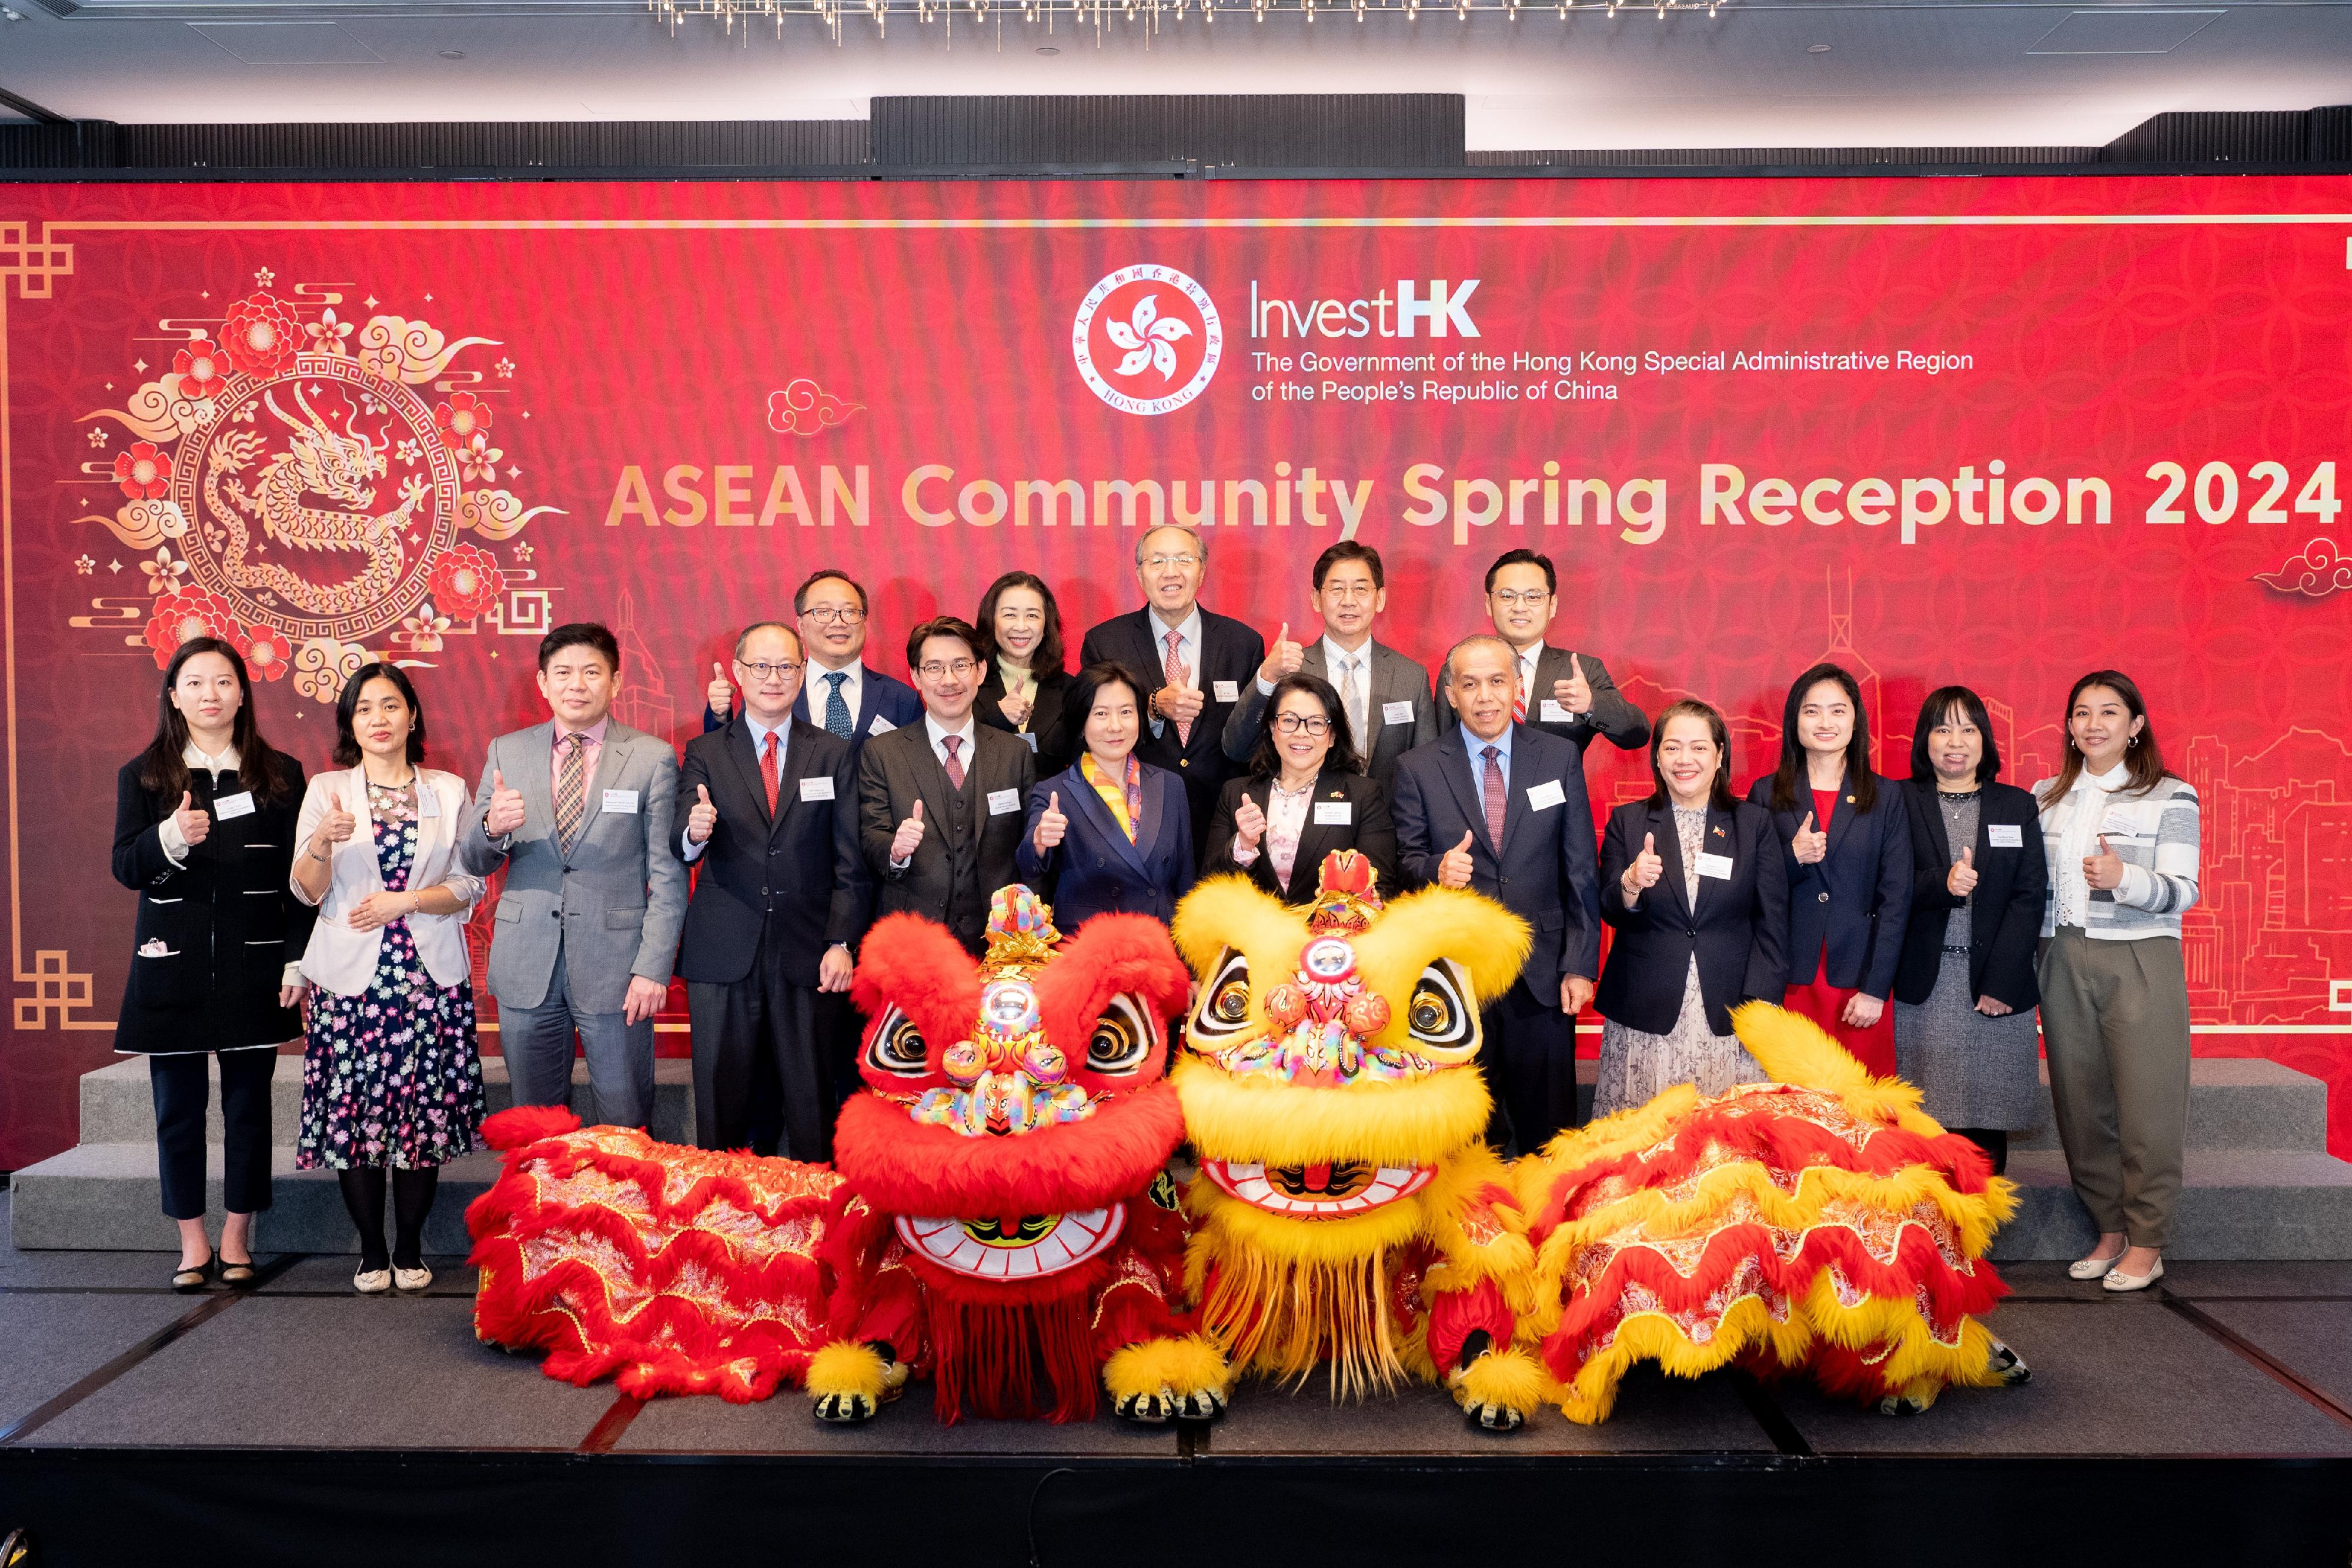 Invest Hong Kong today (February 29) organised a spring reception to thank the Association of Southeast Asian Nations business community for their support. Photo shows (front row, from left) the Director of Commercial Centre of Cambodia in Hong Kong, Mrs Lyna Fang; the Head of Trade Office of the Consulate General of Vietnam in Hong Kong, Ms Vu Thi Thuy; the Consul-General of Thailand in Hong Kong, Mr Chaturont Chaiyakam; the Consul-General of Singapore in Hong Kong, Mr Ong Siew Gay; the Associate Director-General of Investment Promotion, Dr Jimmy Chiang; the Director-General of Investment Promotion, Ms Alpha Lau; the Consul-General of Brunei Darussalam in Hong Kong, Mrs Ainatol Zahayu Mohammad; the Consul-General of Indonesia in Hong Kong, Mr Yul Edison; the Consul-General of the Philippines in Hong Kong, Mrs Germinia V. Aguilar-Usudan; Deputy Consul-General of Malaysia in Hong Kong, Ms Lai Kee Hee; the Economic Counsellor of Myanmar in Hong Kong, Mrs Hnin Zar Hlwar; Vice Consul of Laos in Hong Kong, Mrs Phousamleth Phankhaong; (back row, from left) the Director of the Indonesian Chamber of Commerce in Hong Kong, Mr Tony Ho; the Trade Commissioner of Thailand in Hong Kong, Miss Pannakarn Jiamsuchon; the Chairman of the Malaysian Chamber of Commerce in Hong Kong and Macau, Dato Khai Choon Gan; the Alternate Chairman of the Singapore Chamber of Commerce (Hong Kong), Mr Jacky Foo; and the Chief Executive Officer of the Hong Kong-ASEAN Foundation, Mr Charles Chia at the event.